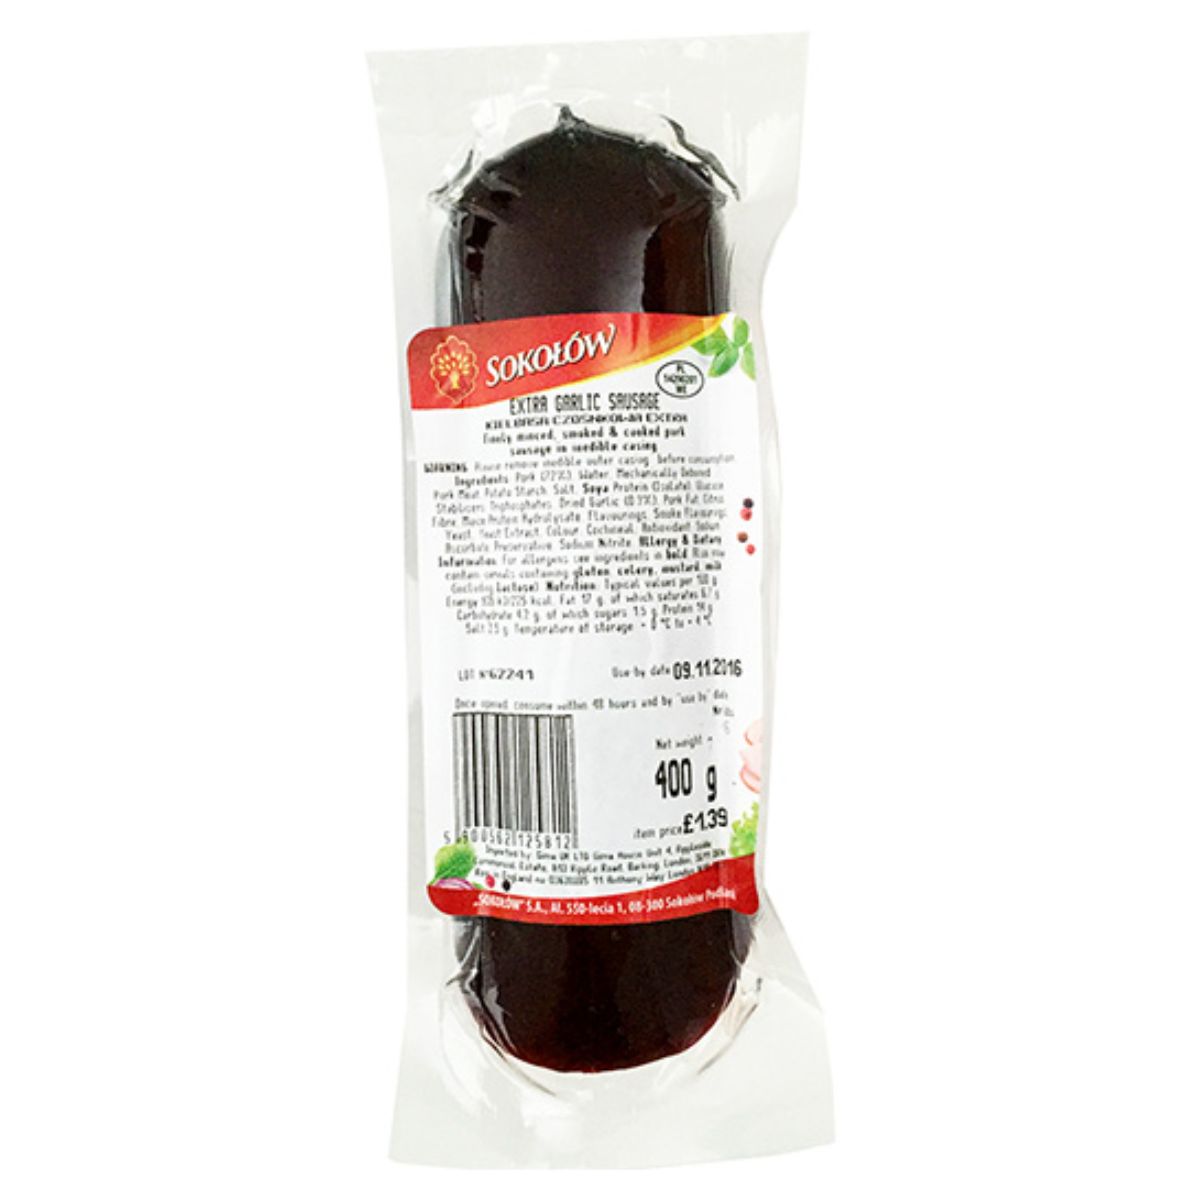 A package of Sokolow - Extra Garlic Sausage - 400g on a white background.